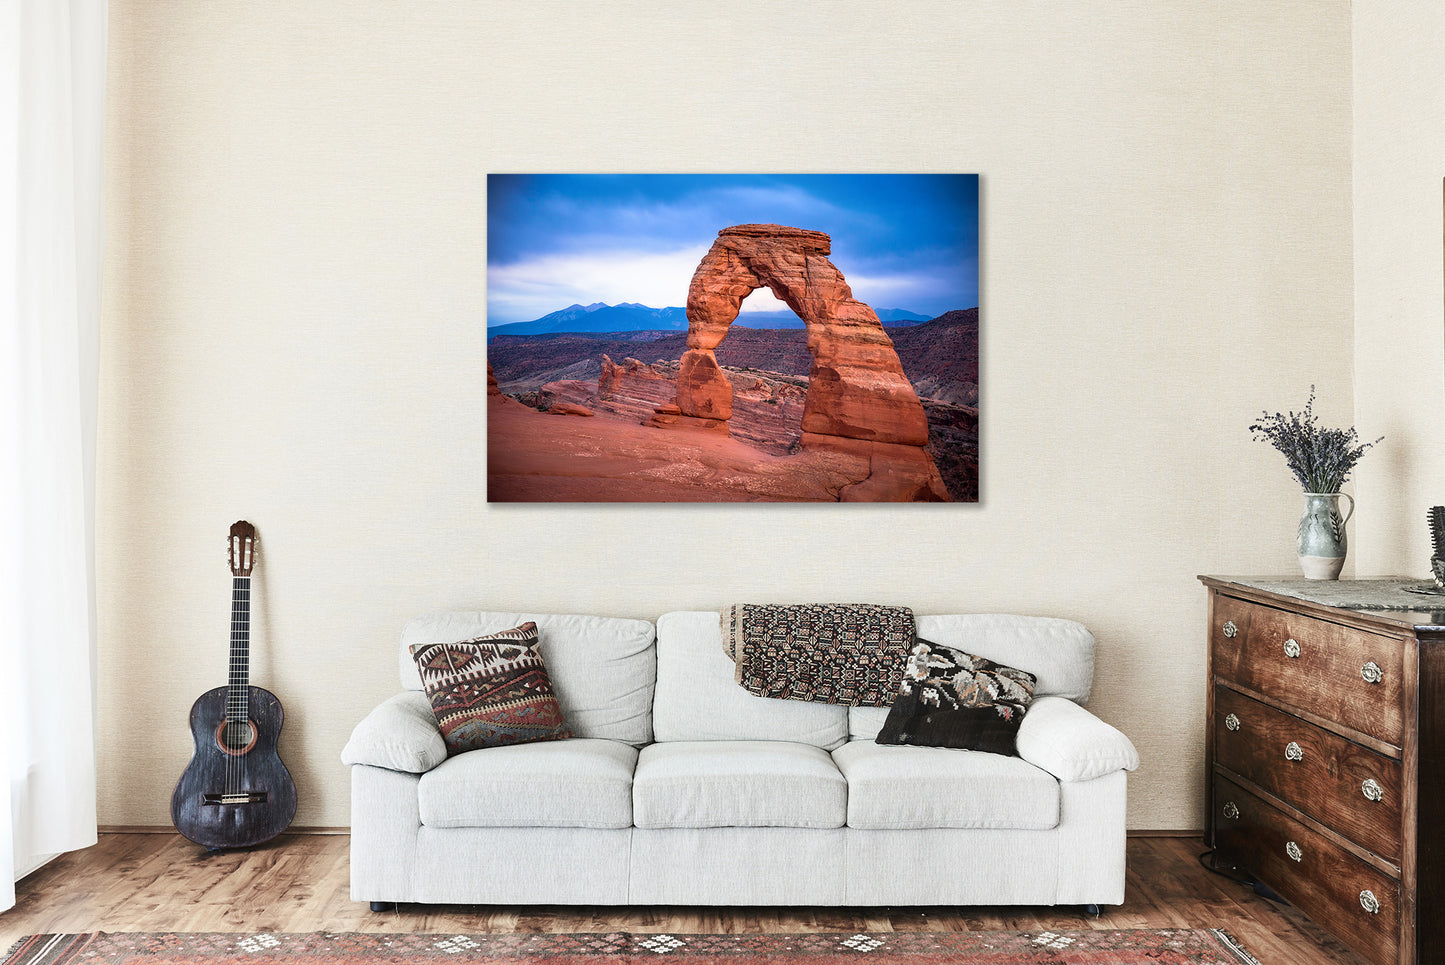 Desert Metal Print (Ready to Hang) Photo on Aluminum of Delicate Arch on Rainy Evening in Arches National Park Utah Western Wall Art Southwestern Decor